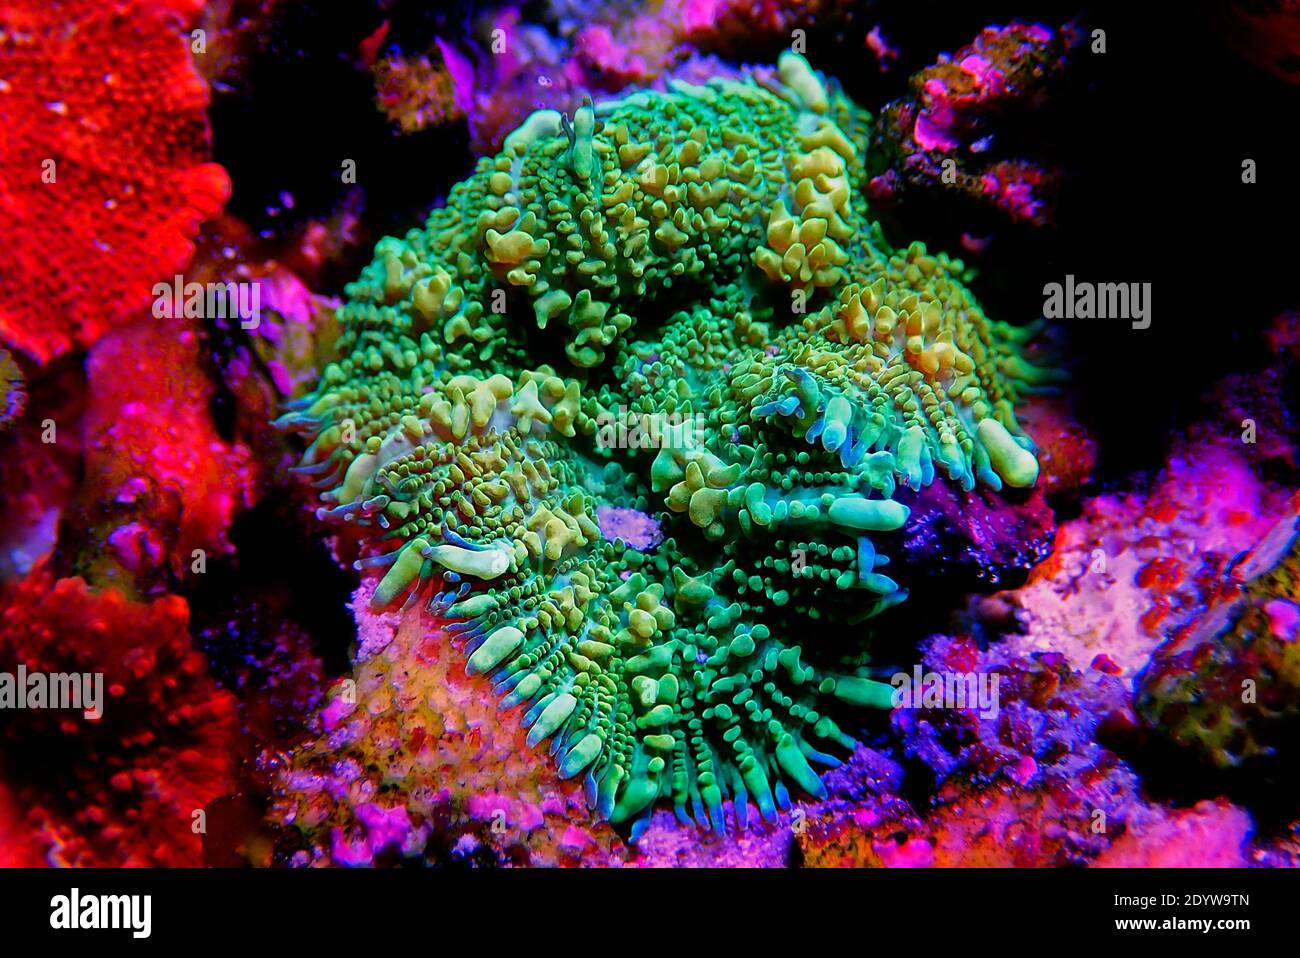 Yellow Claw Rhodactis Mushroom soft coral in reef tank Stock Photo